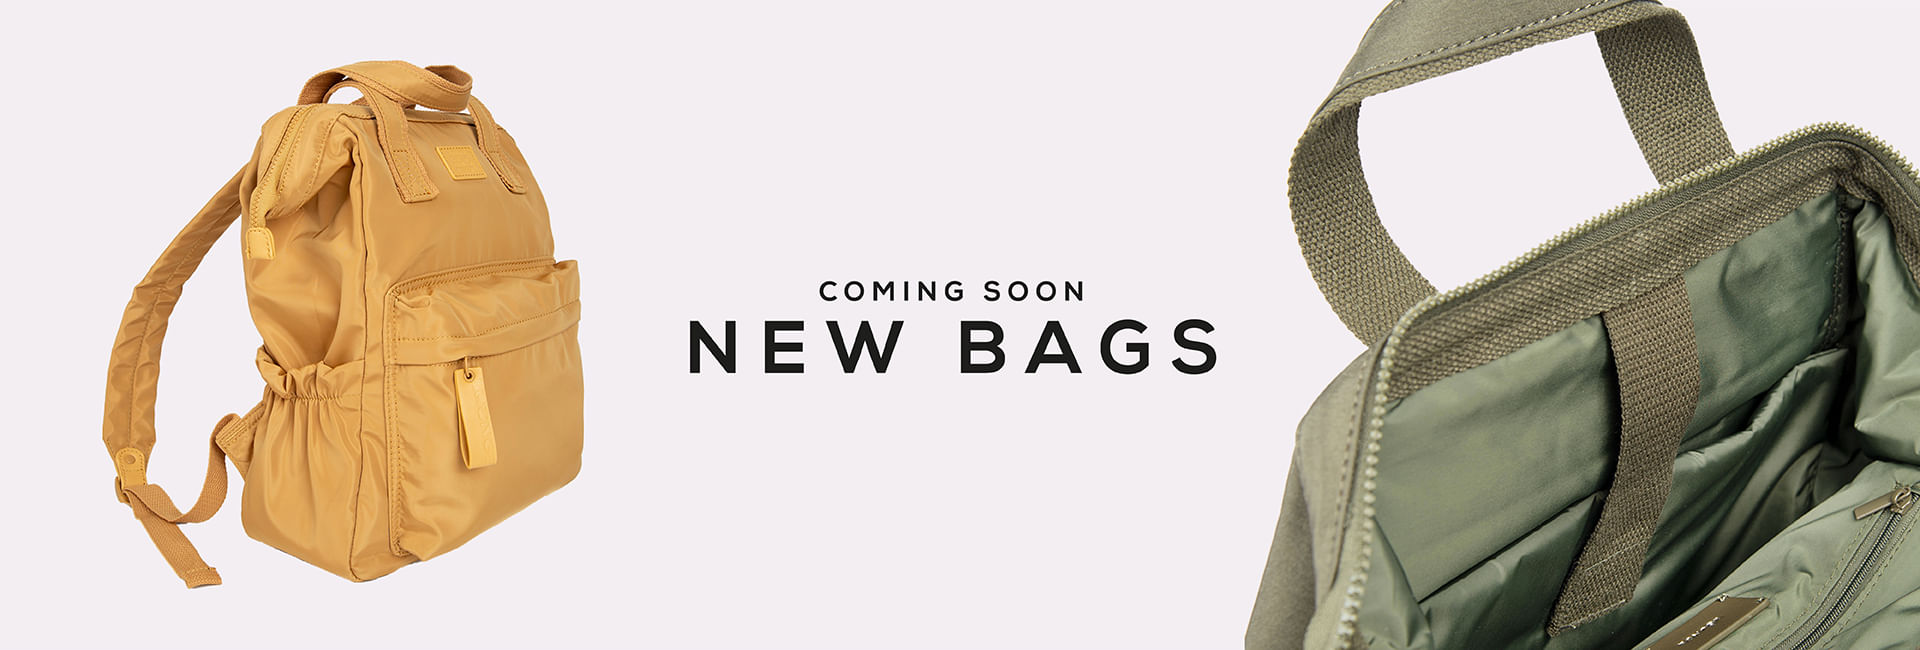 new bags 18